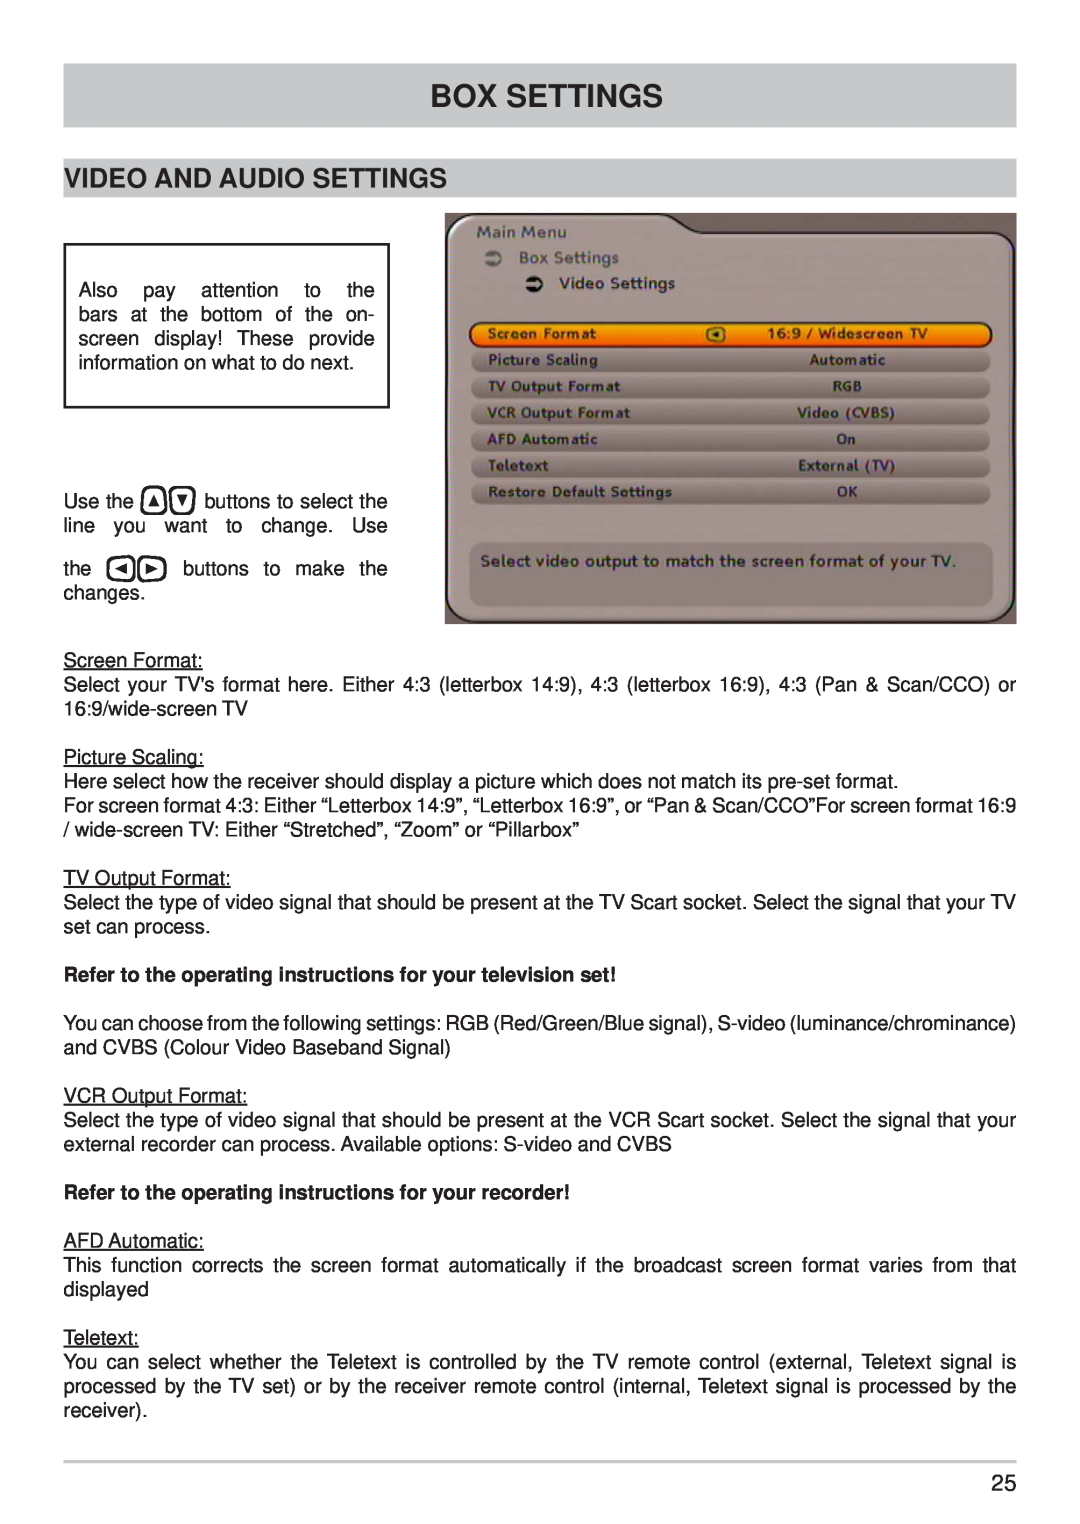 Kathrein UFC 762sw Video And Audio Settings, Box Settings, Refer to the operating instructions for your television set 